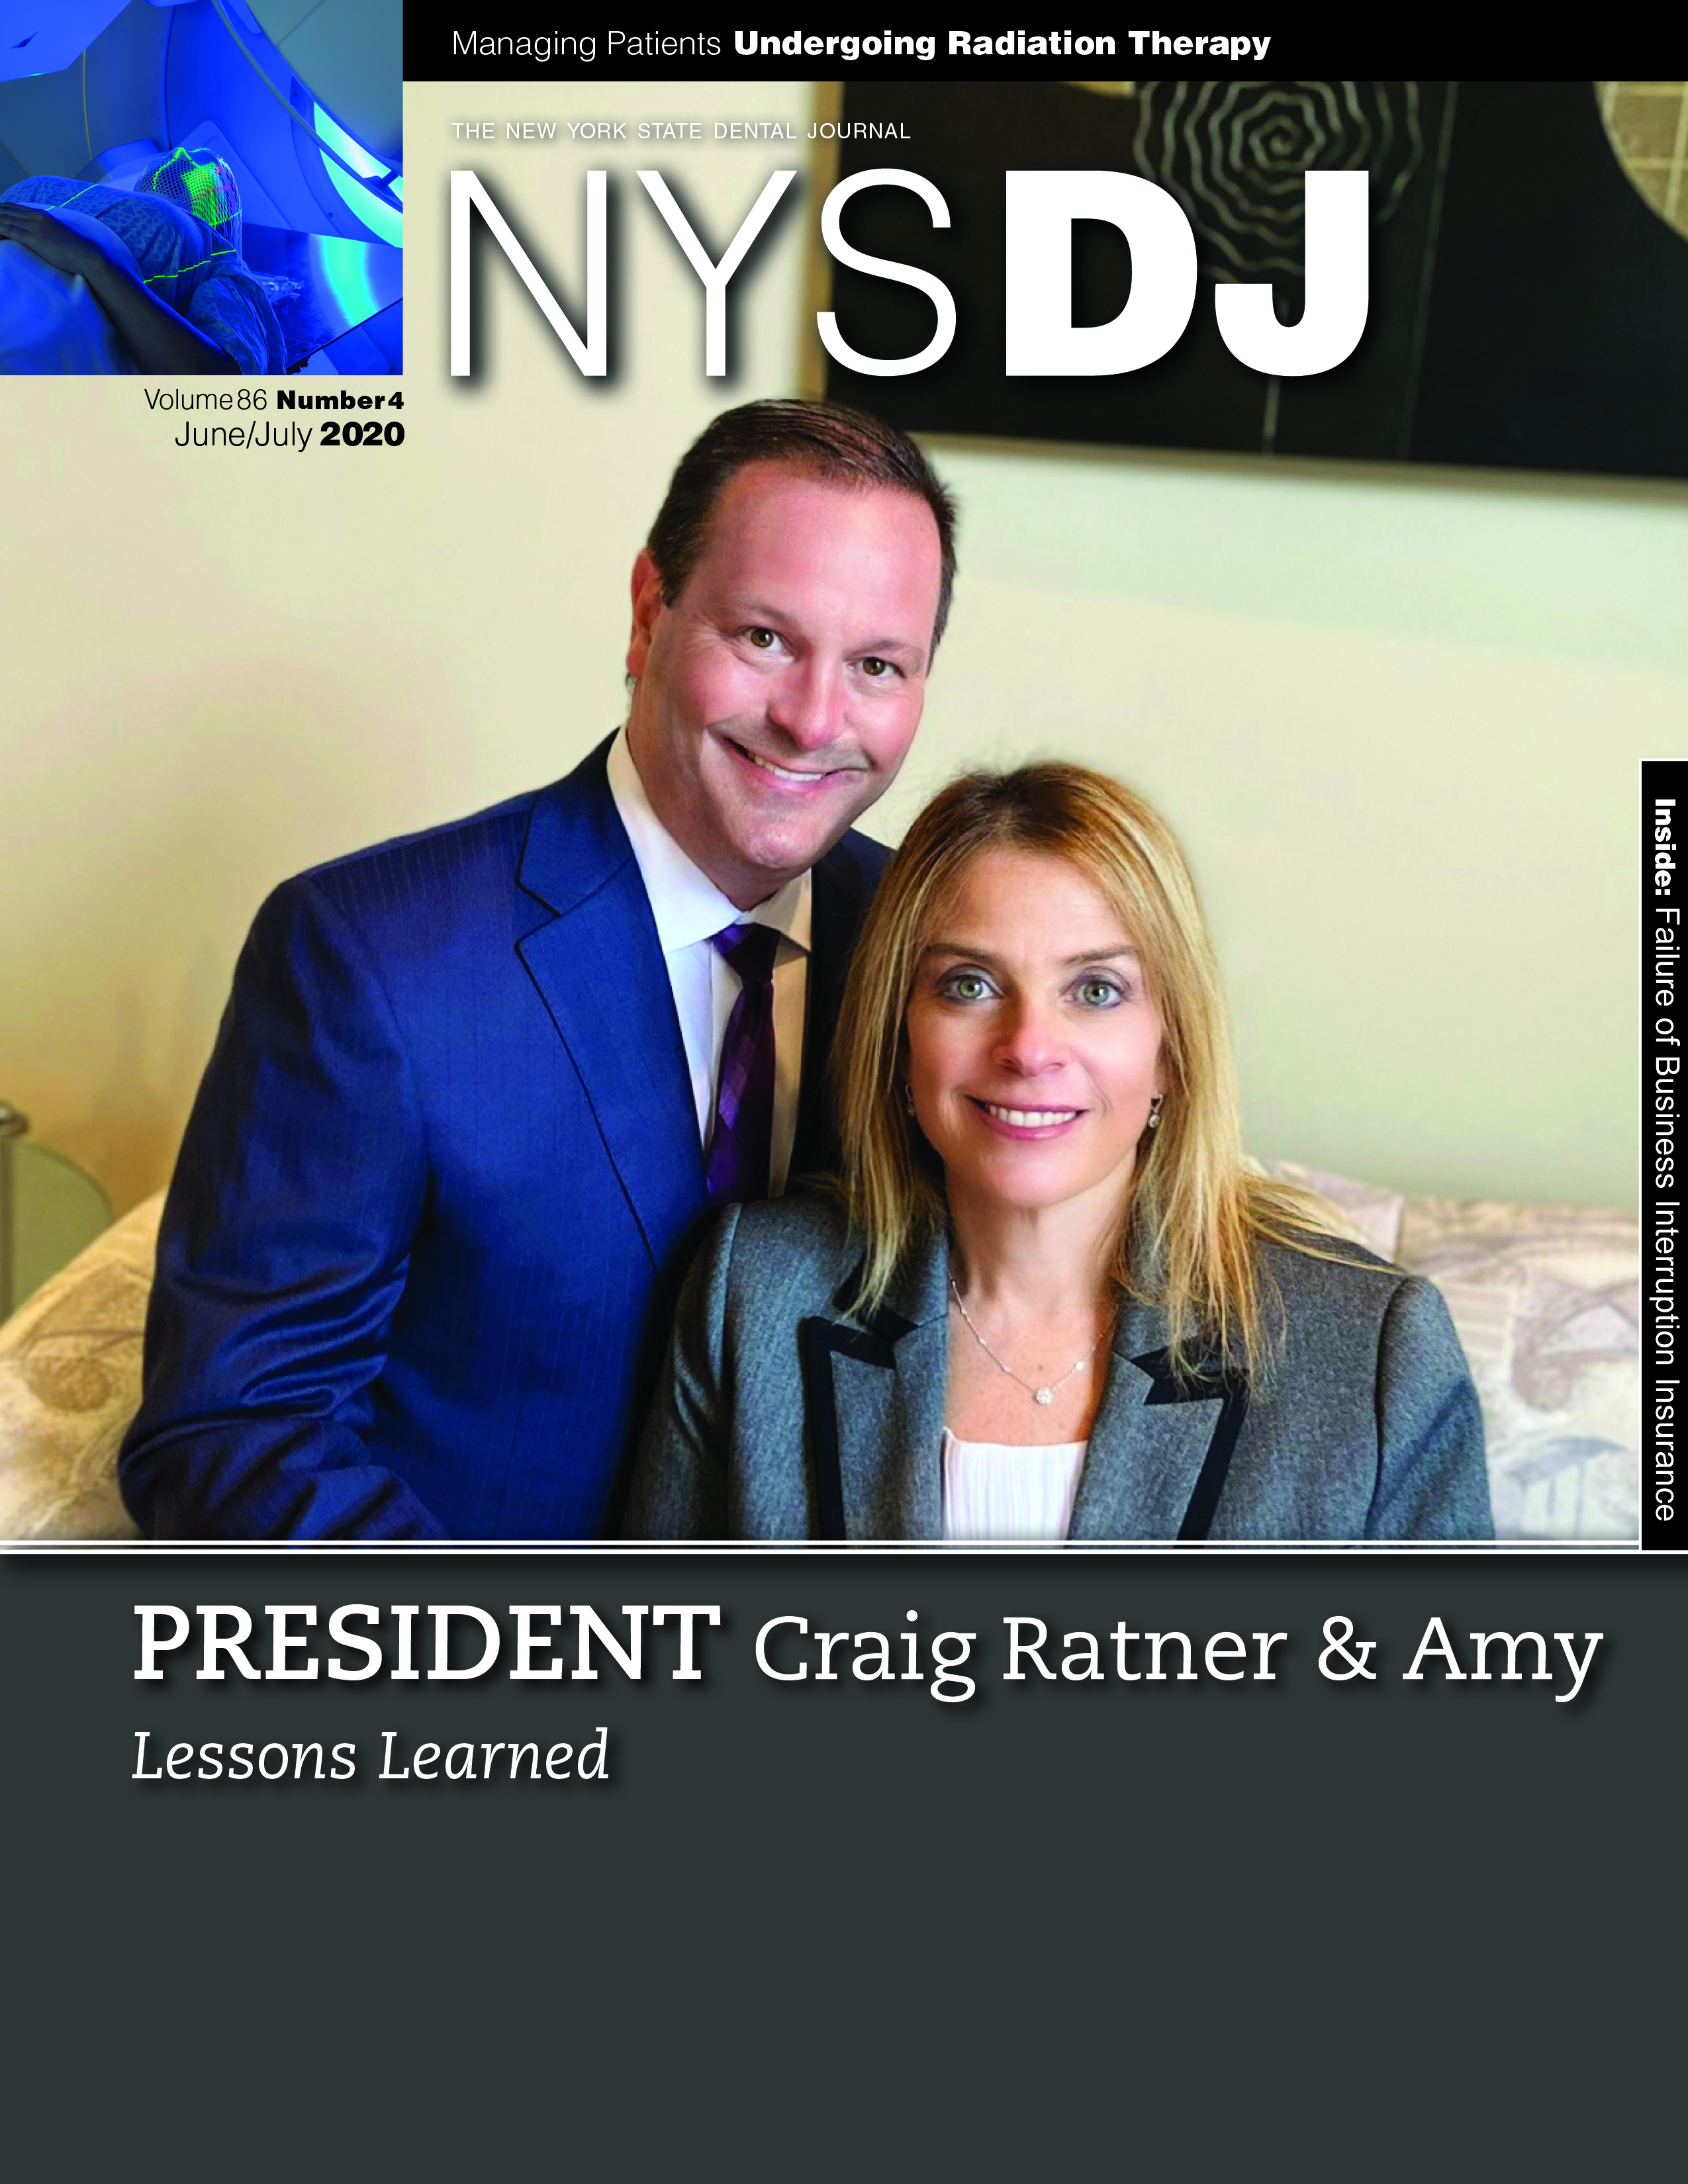 Cover of the NYSDJ with NYSDA President Craig Ratner